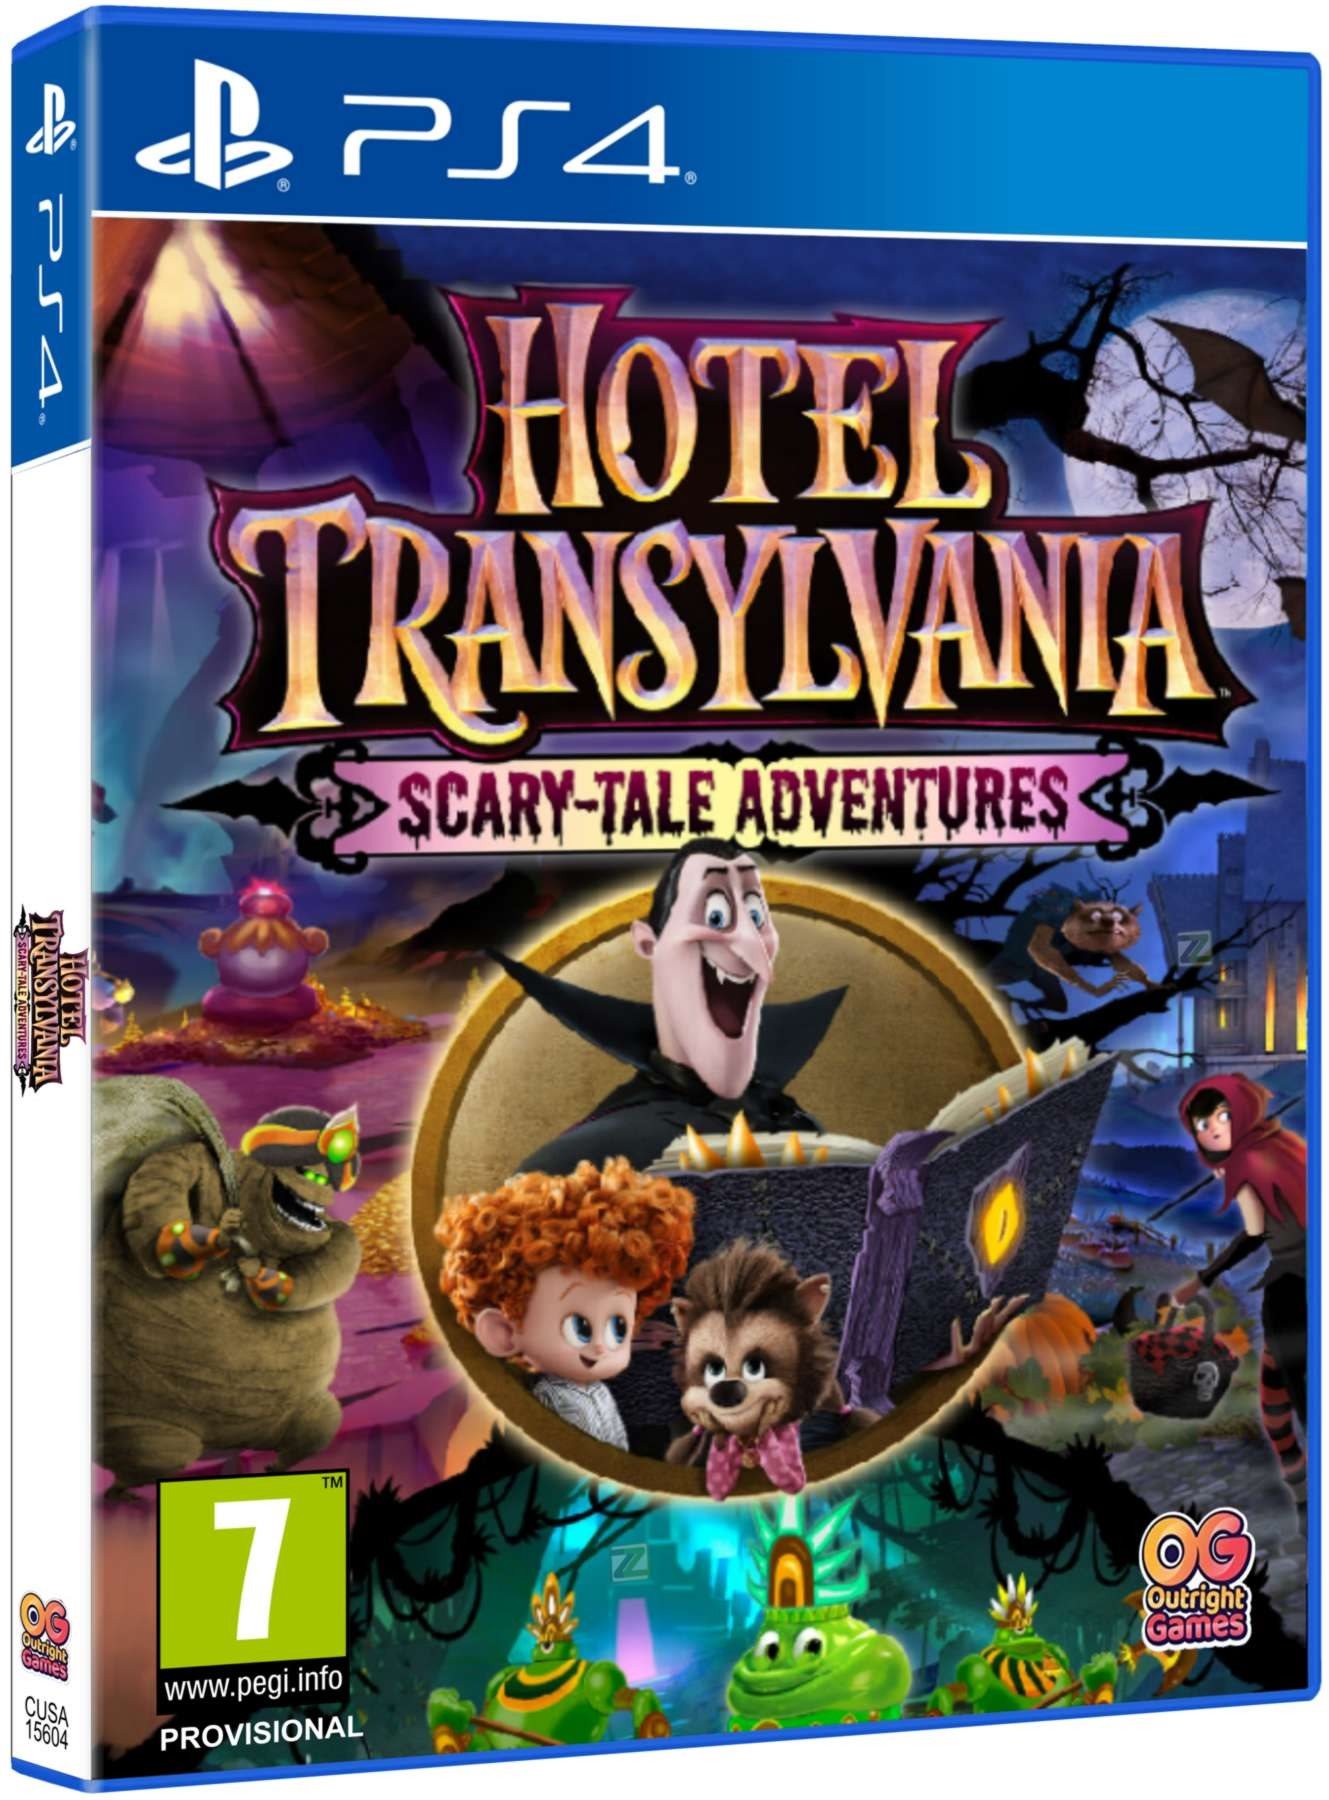 Hotel Transylvania: Scary-Tale Adventures - PS4, PS5